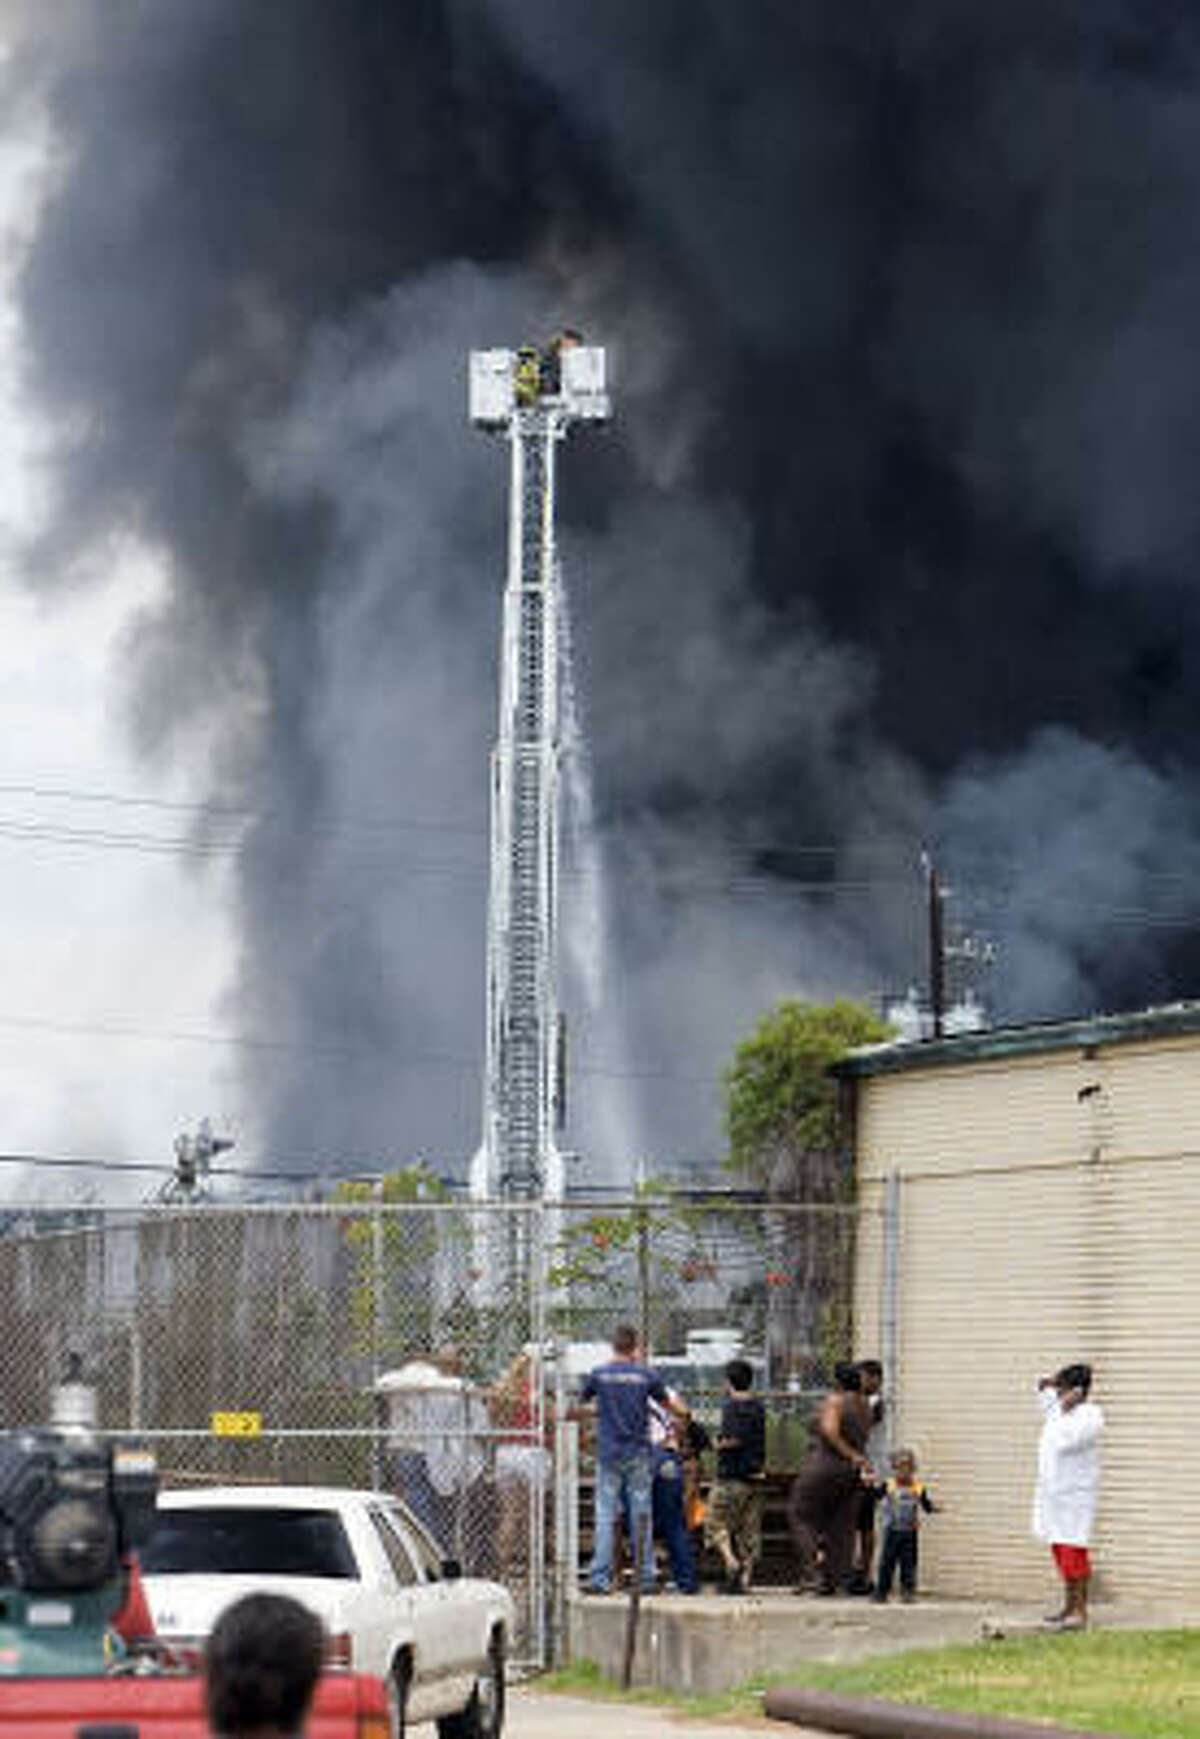 A crowd watches Houston firefighters battle the blaze at a building at Old Clinton Road and Shotwell on Saturday.